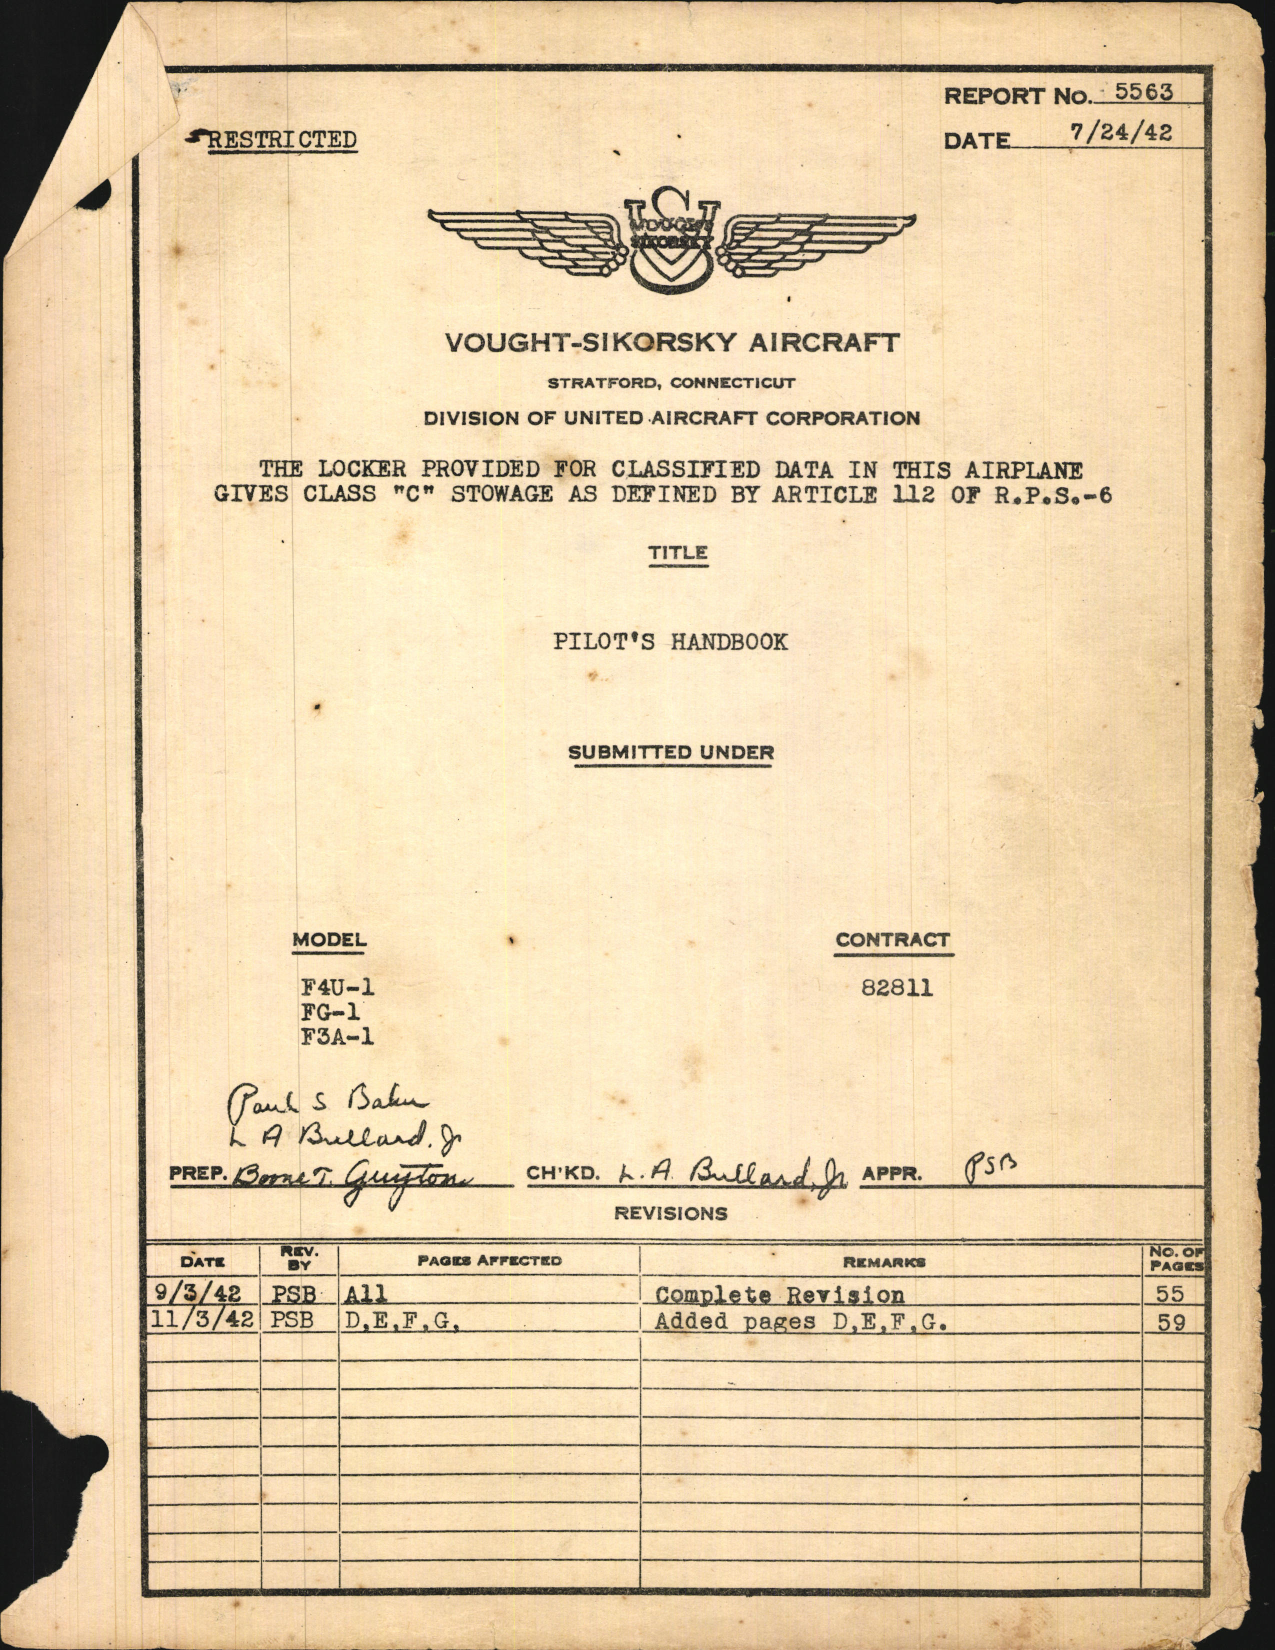 Sample page 5 from AirCorps Library document: Pilot's Handbook for F4U-1 Aircraft